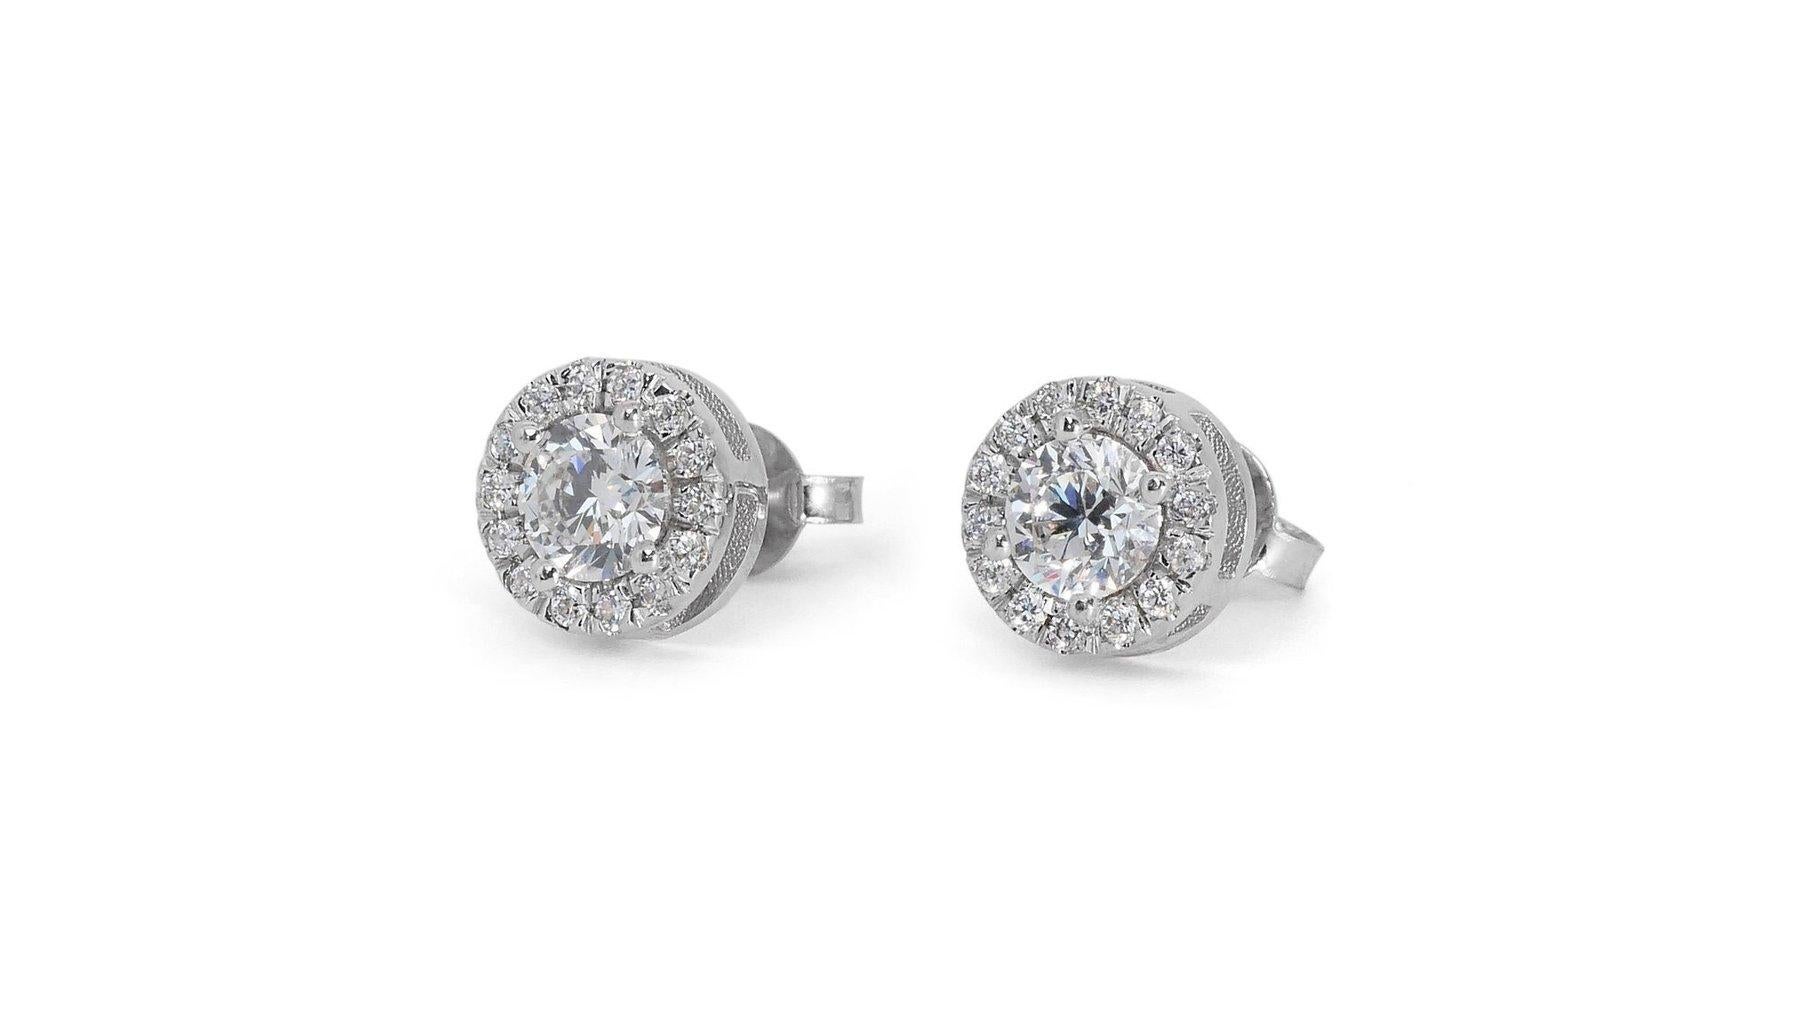 Dazzling 1.45ct Diamond Stud Earrings in 18k White Gold - GIA Certified For Sale 1